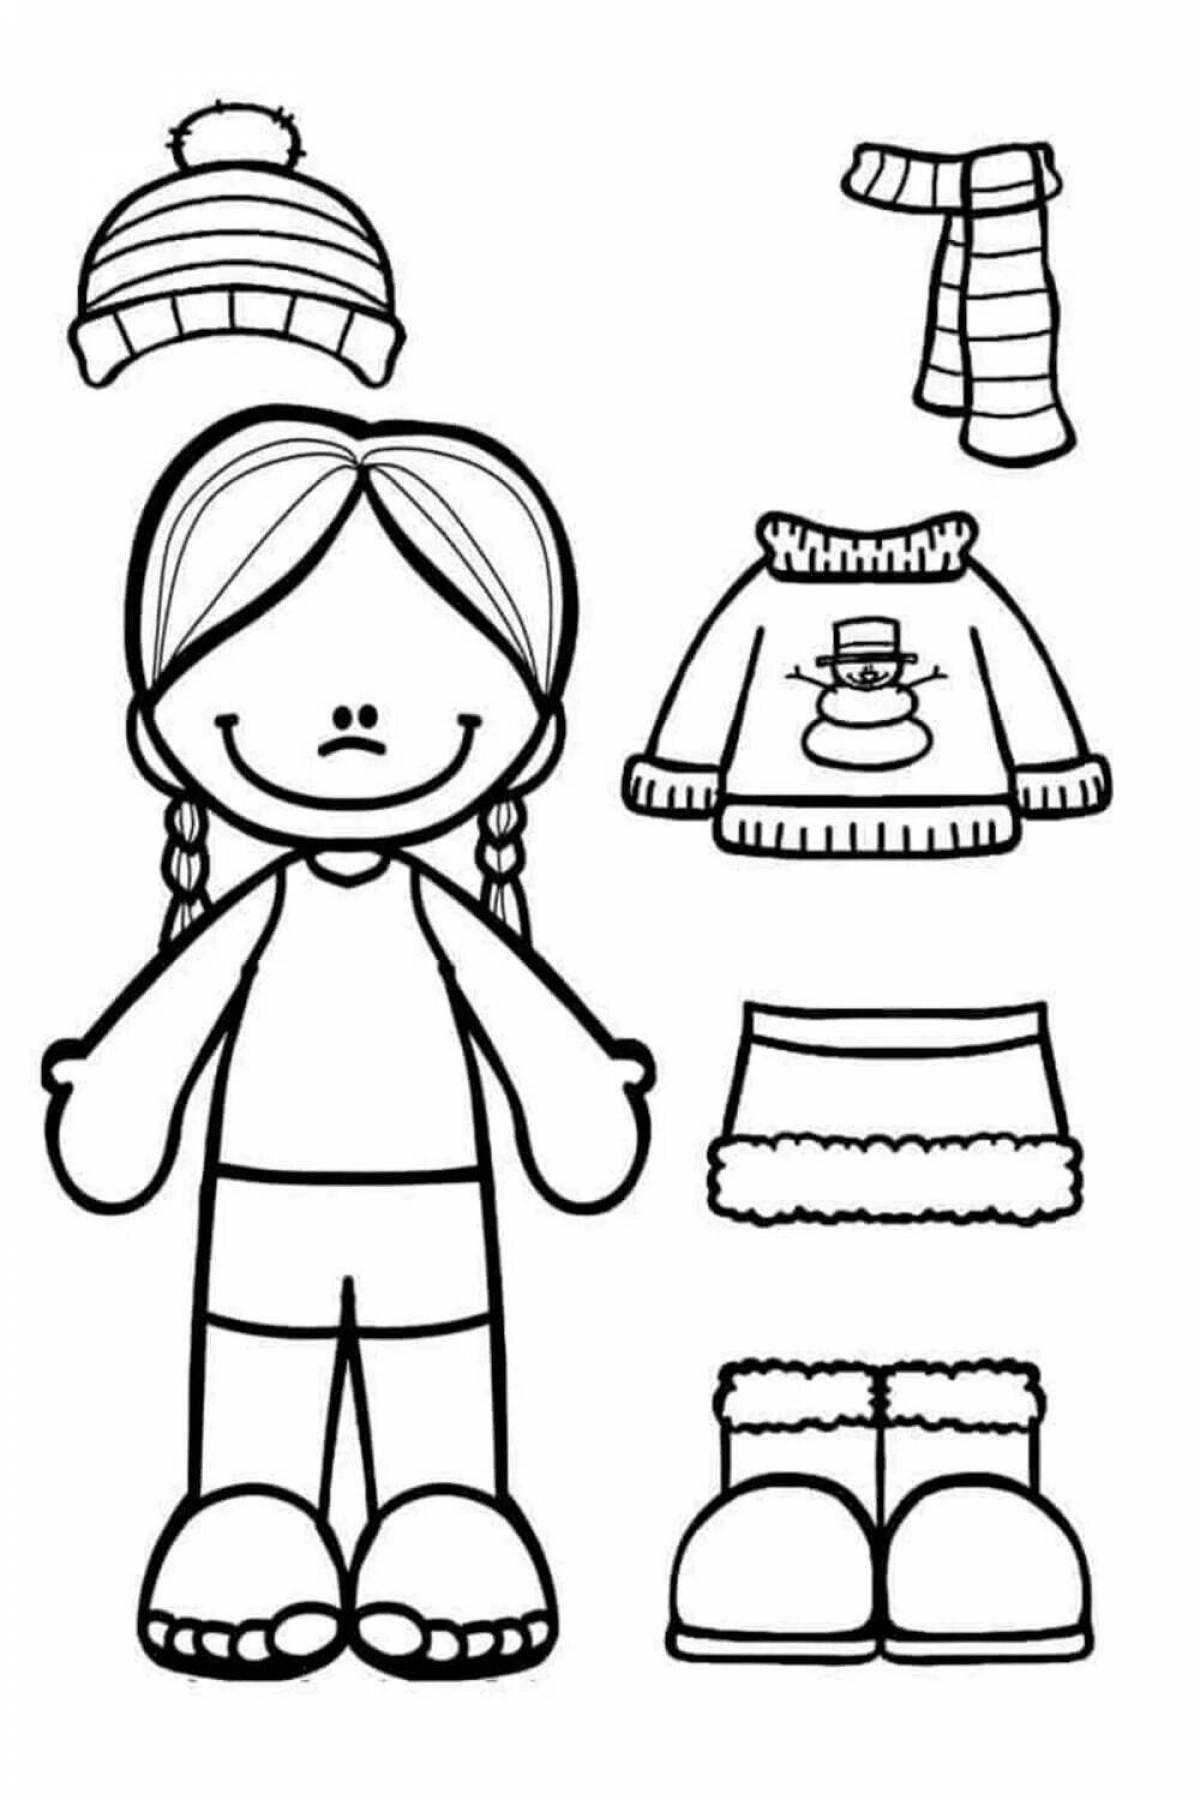 Doll majestic coloring page in winter clothes